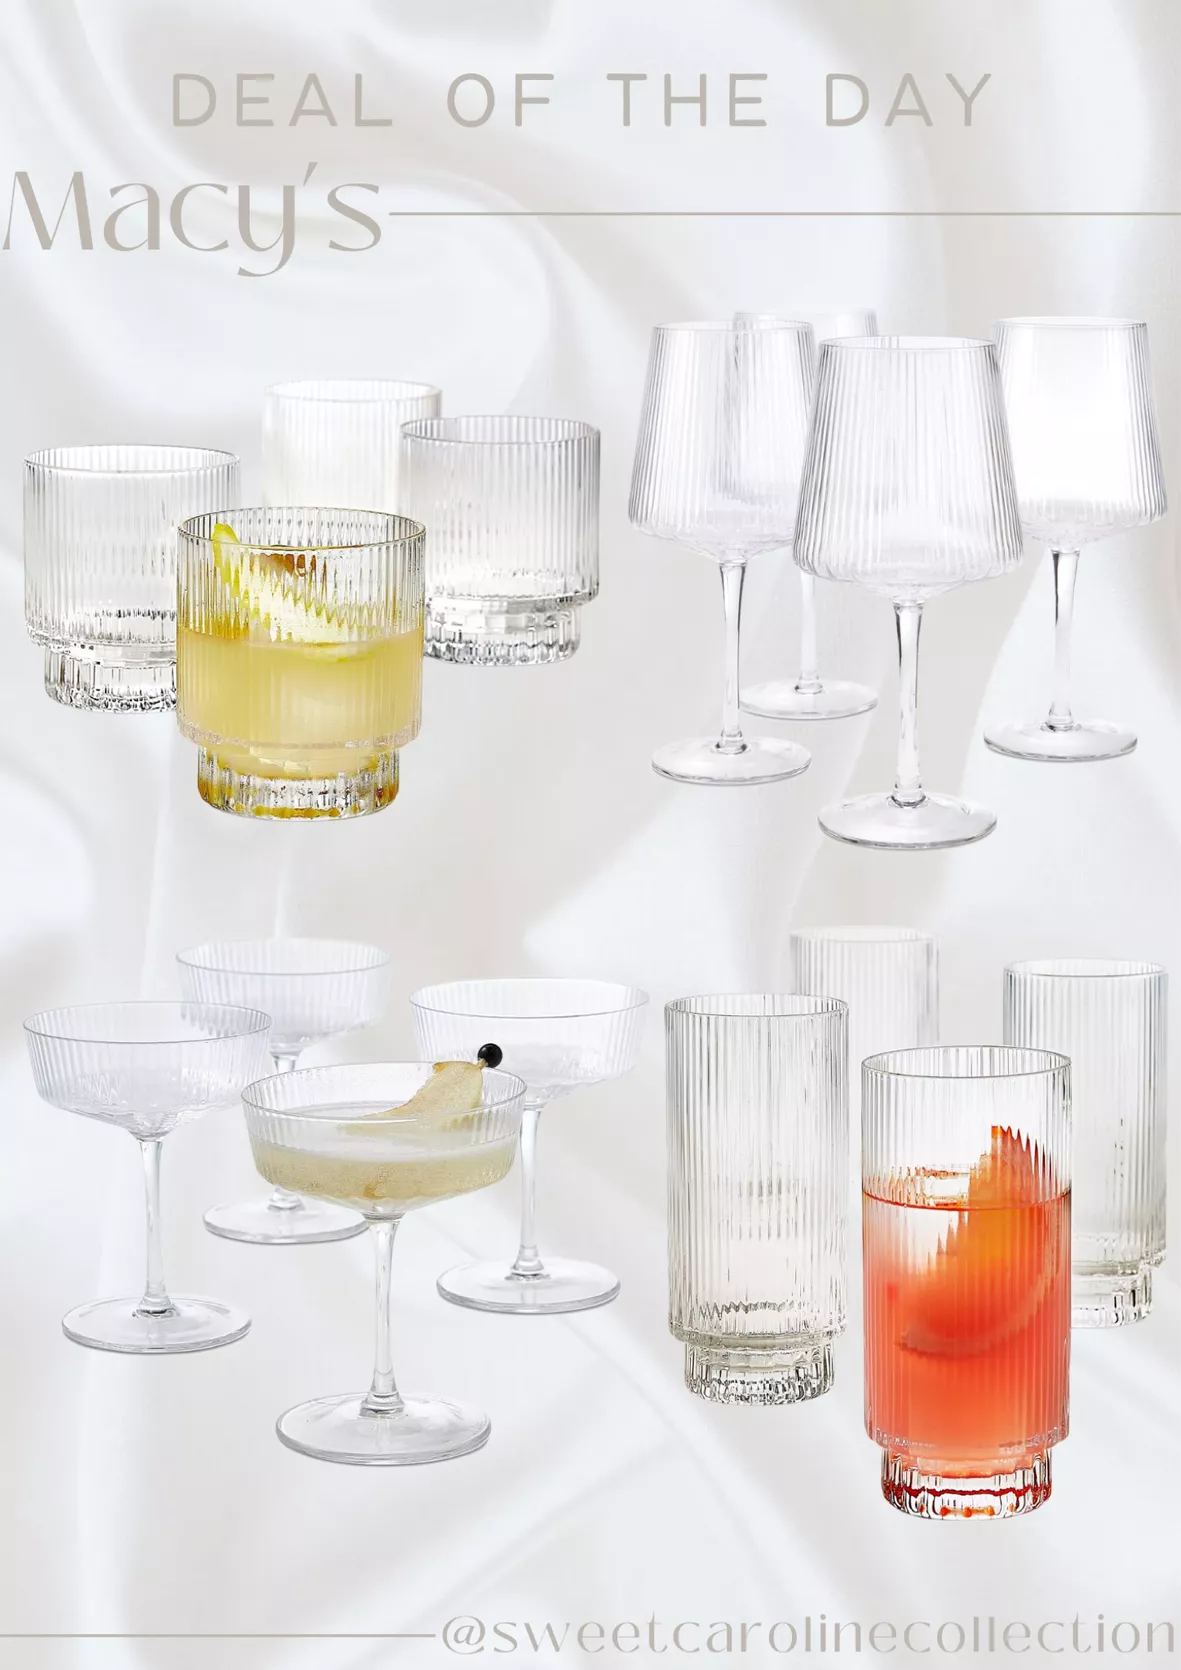 Hotel Collection Coupe Cocktail Glass, Set of 4, Created for Macy's - Clear